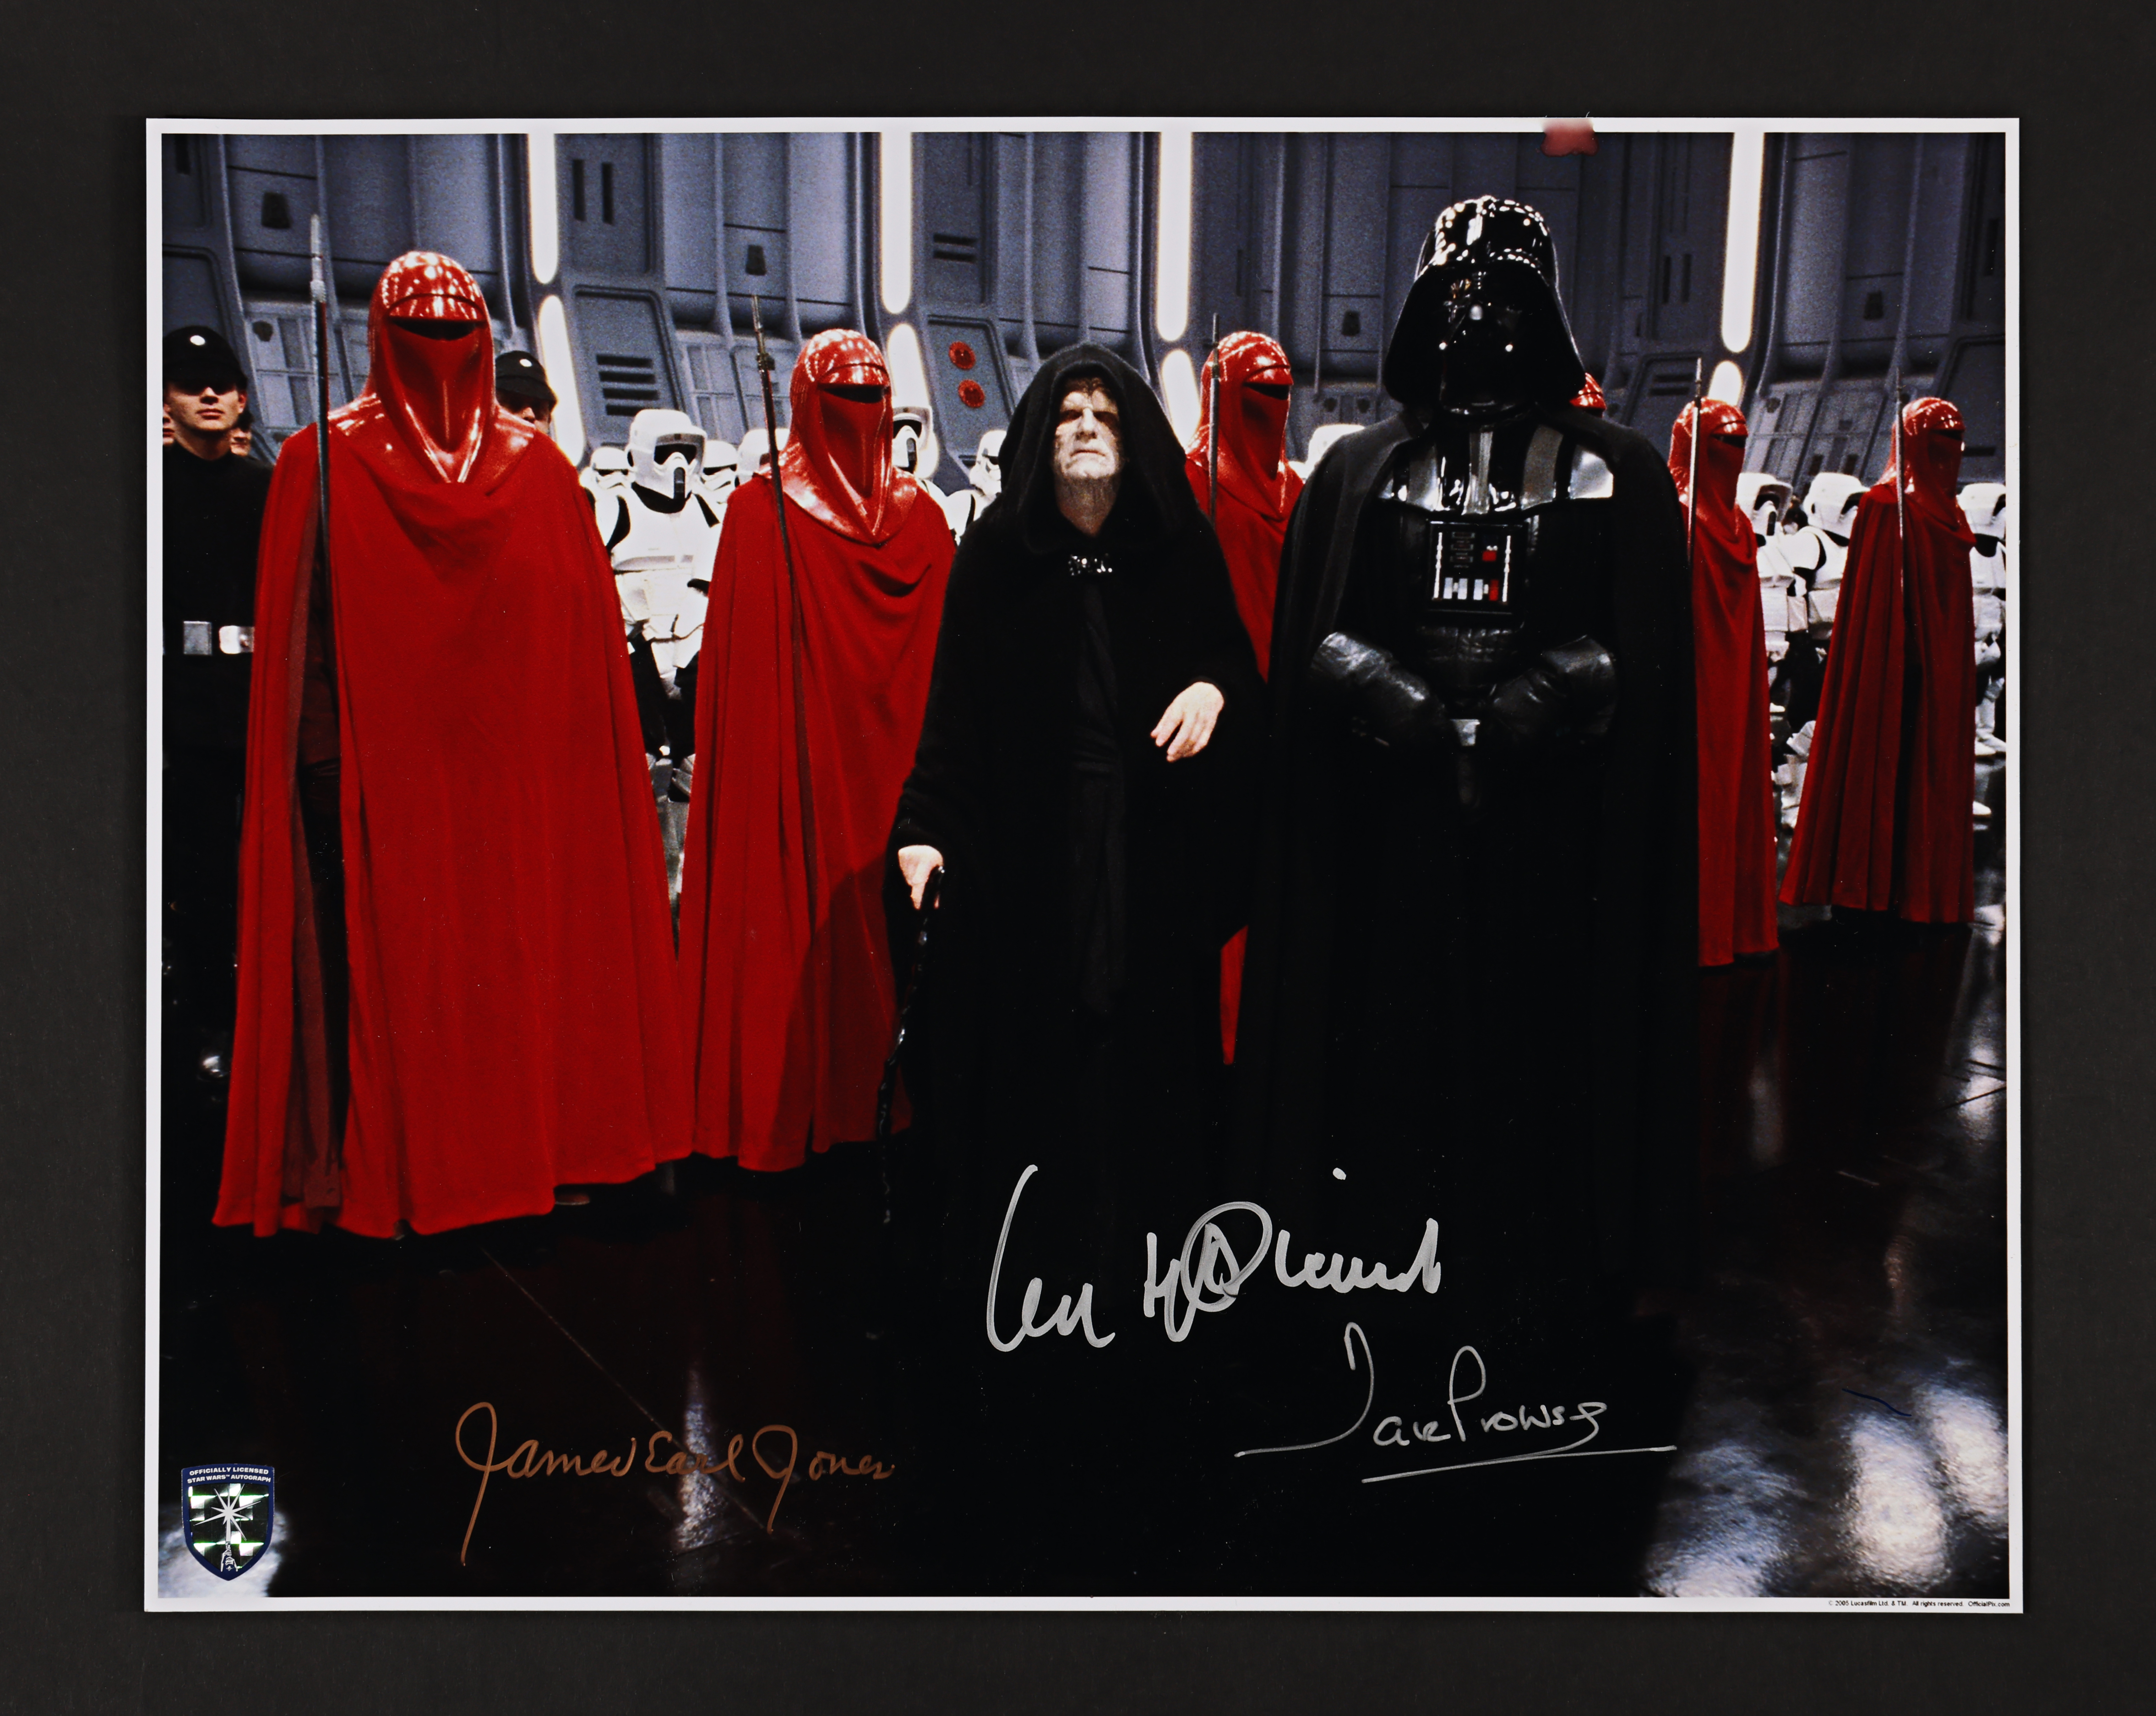 STAR WARS: RETURN OF THE JEDI (1983) - James Earl Jones, Ian McDiarmid and Dave Prowse Autographed L